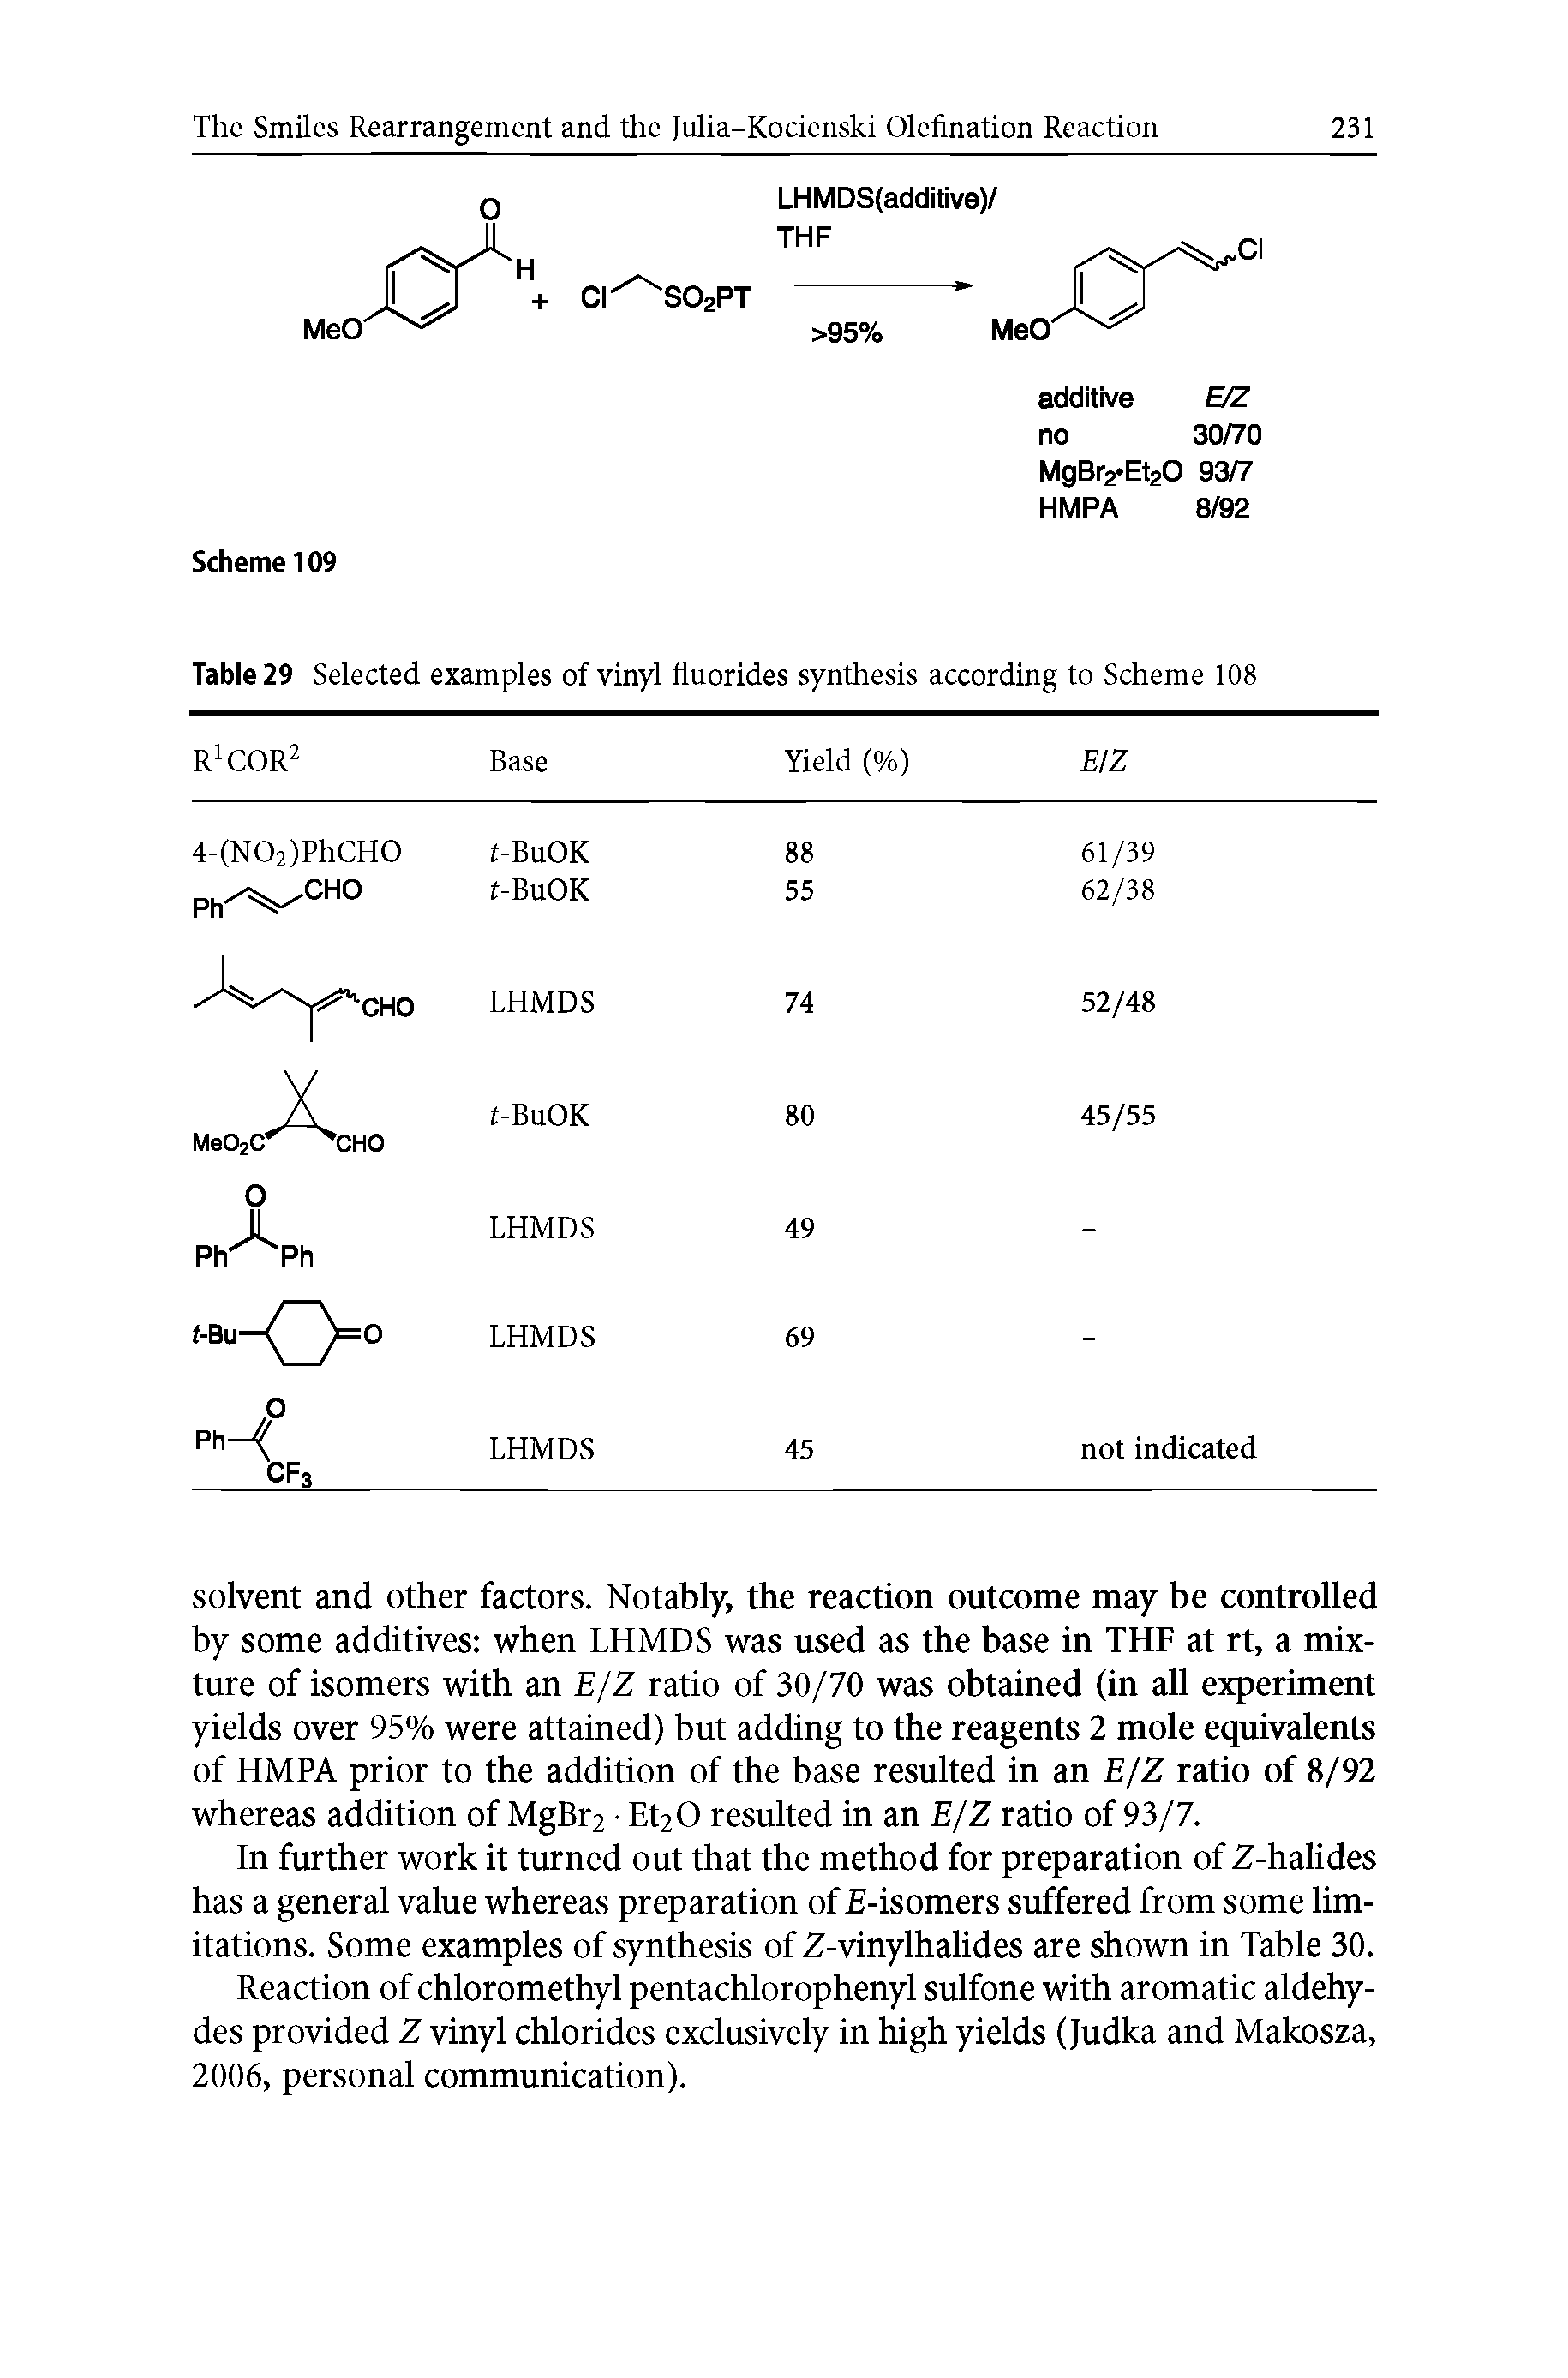 Table 29 Selected examples of vinyl fluorides synthesis according to Scheme 108...